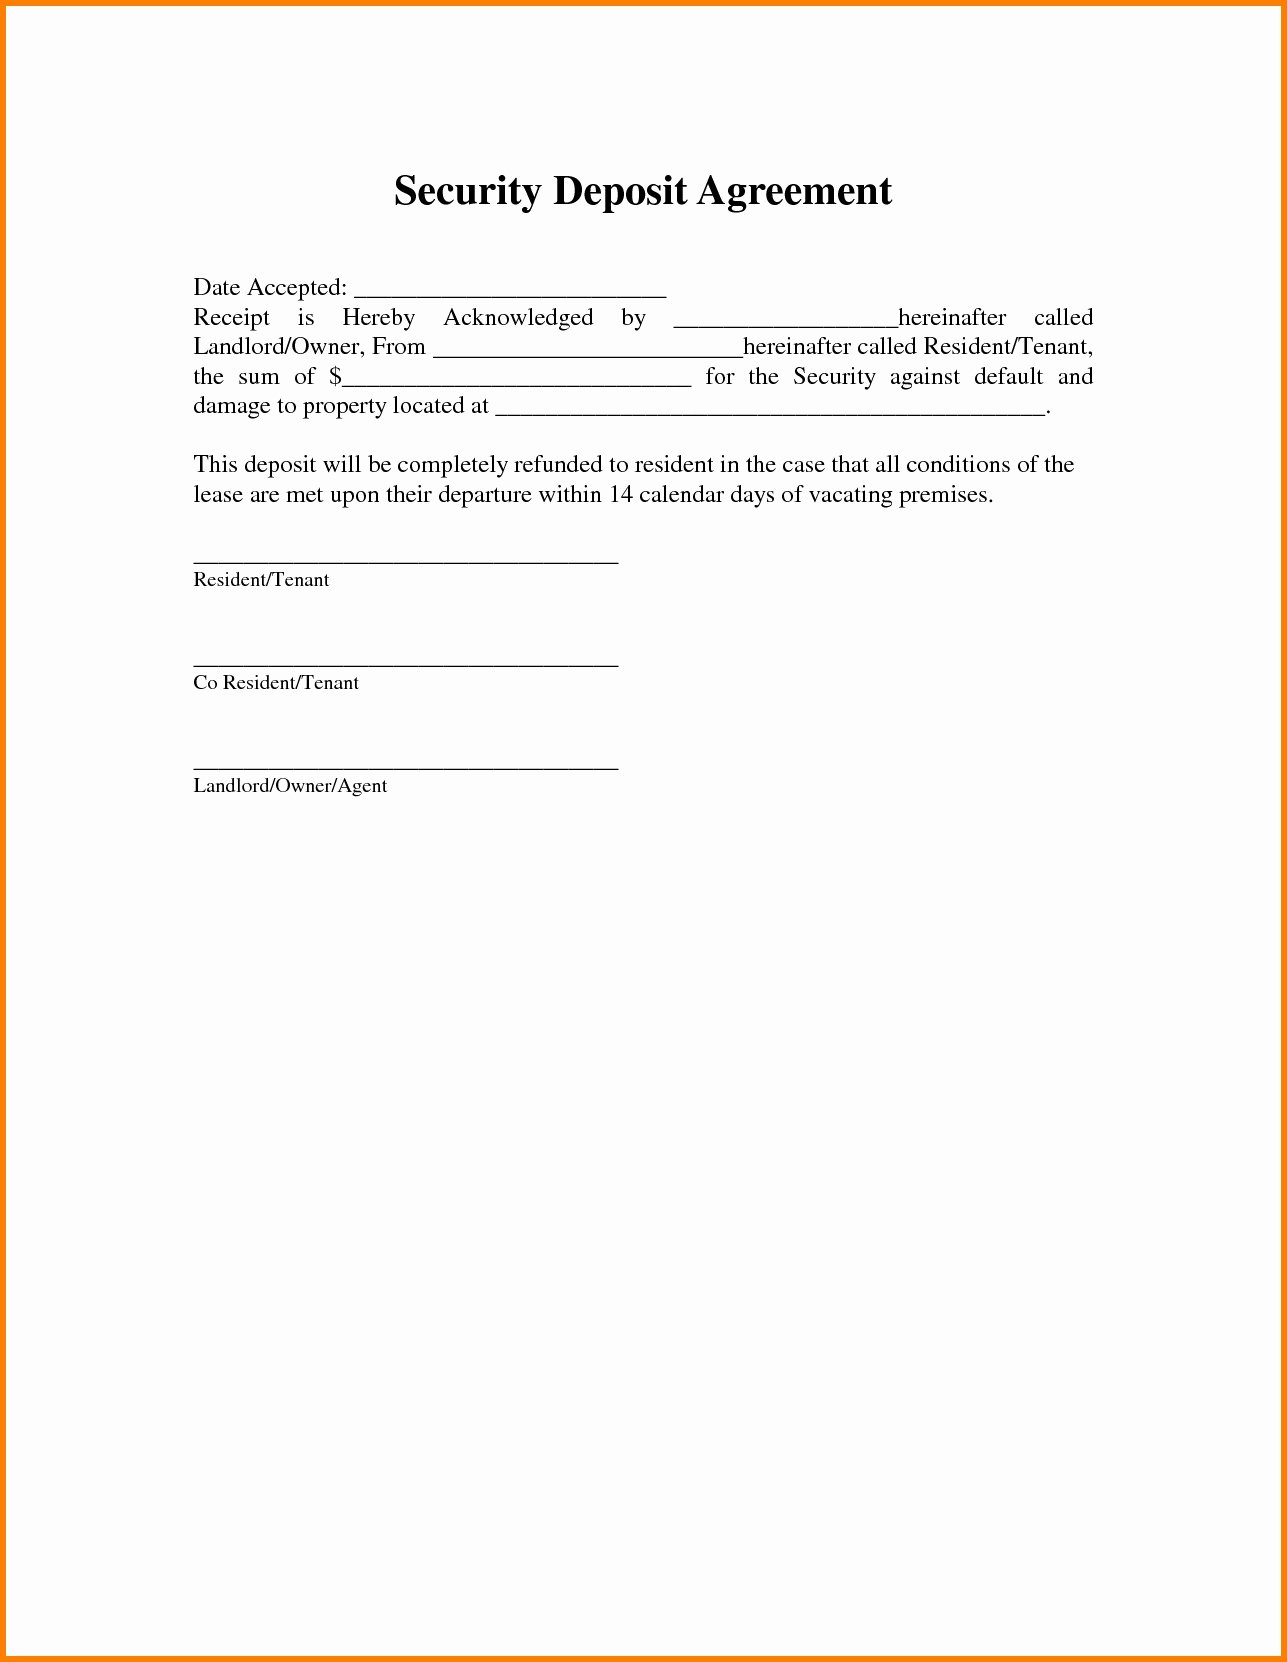 Security Deposit Receipt Template Awesome Deposit Agreement Template Regular Down Payment Security